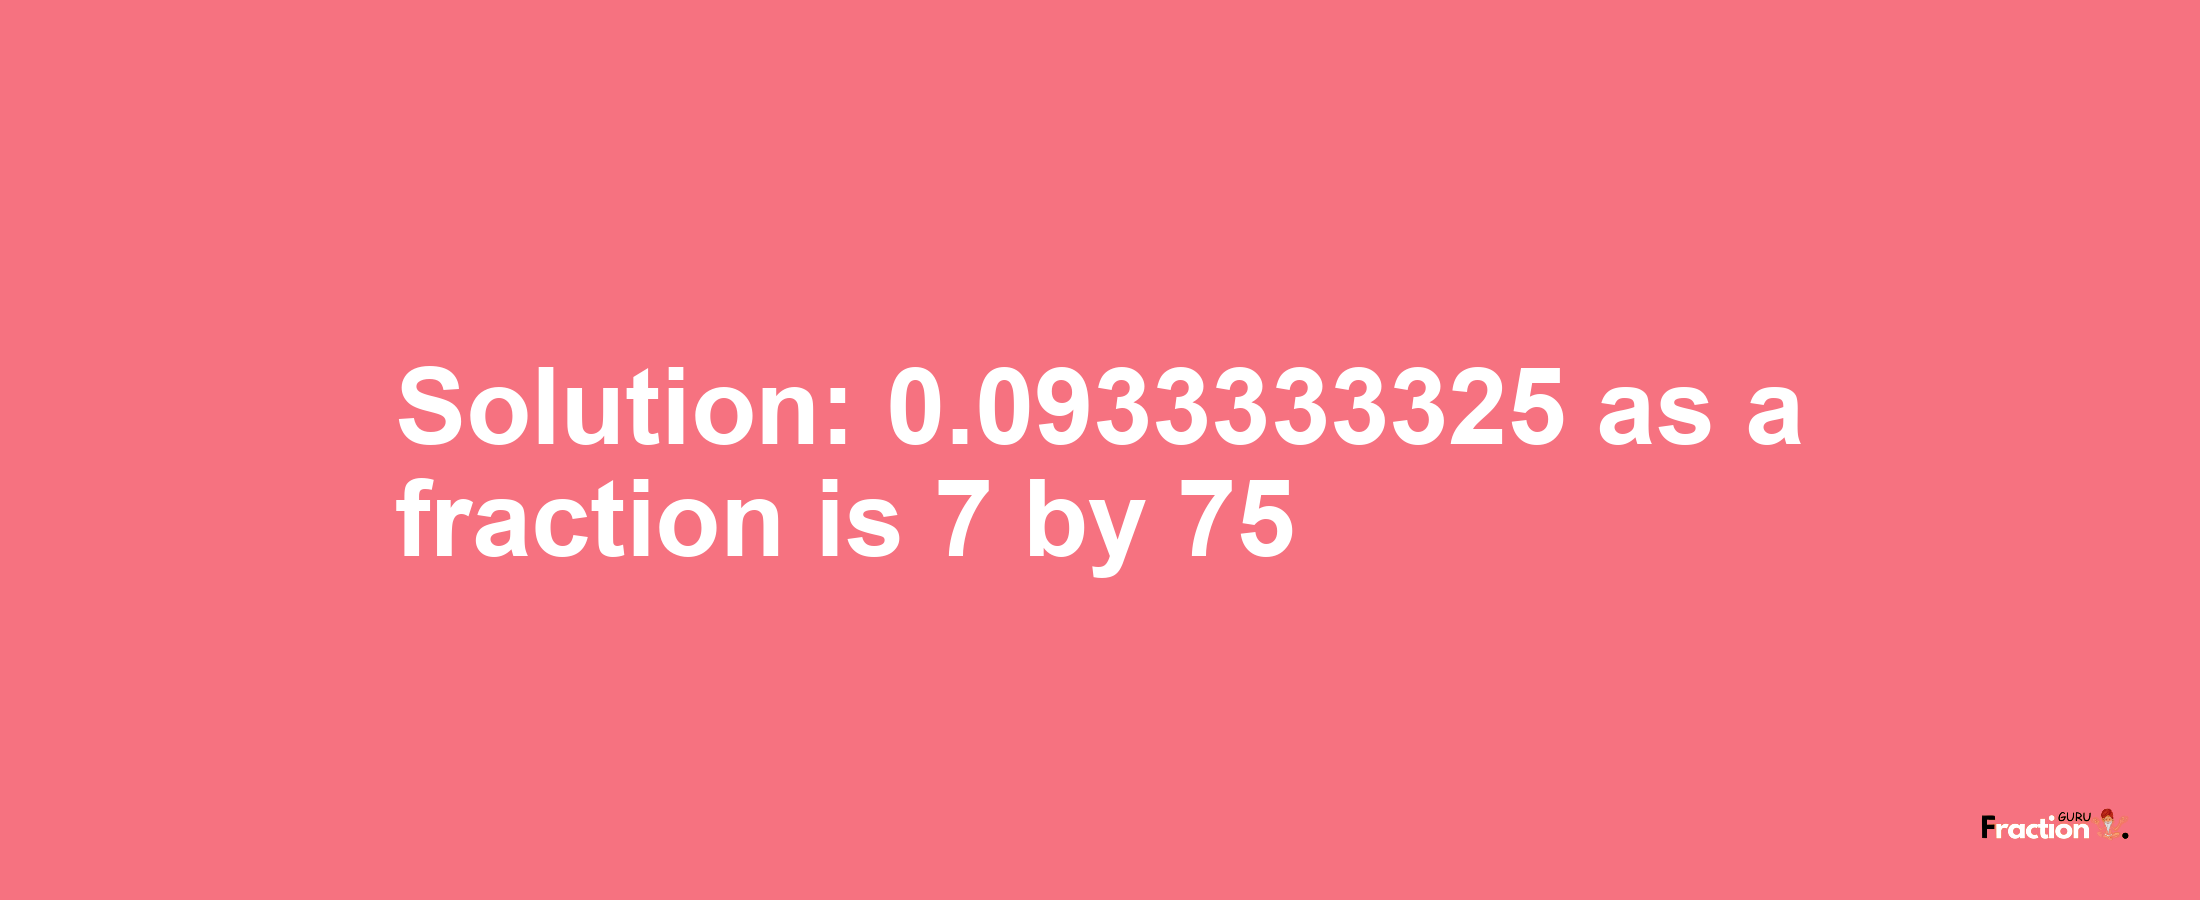 Solution:0.0933333325 as a fraction is 7/75